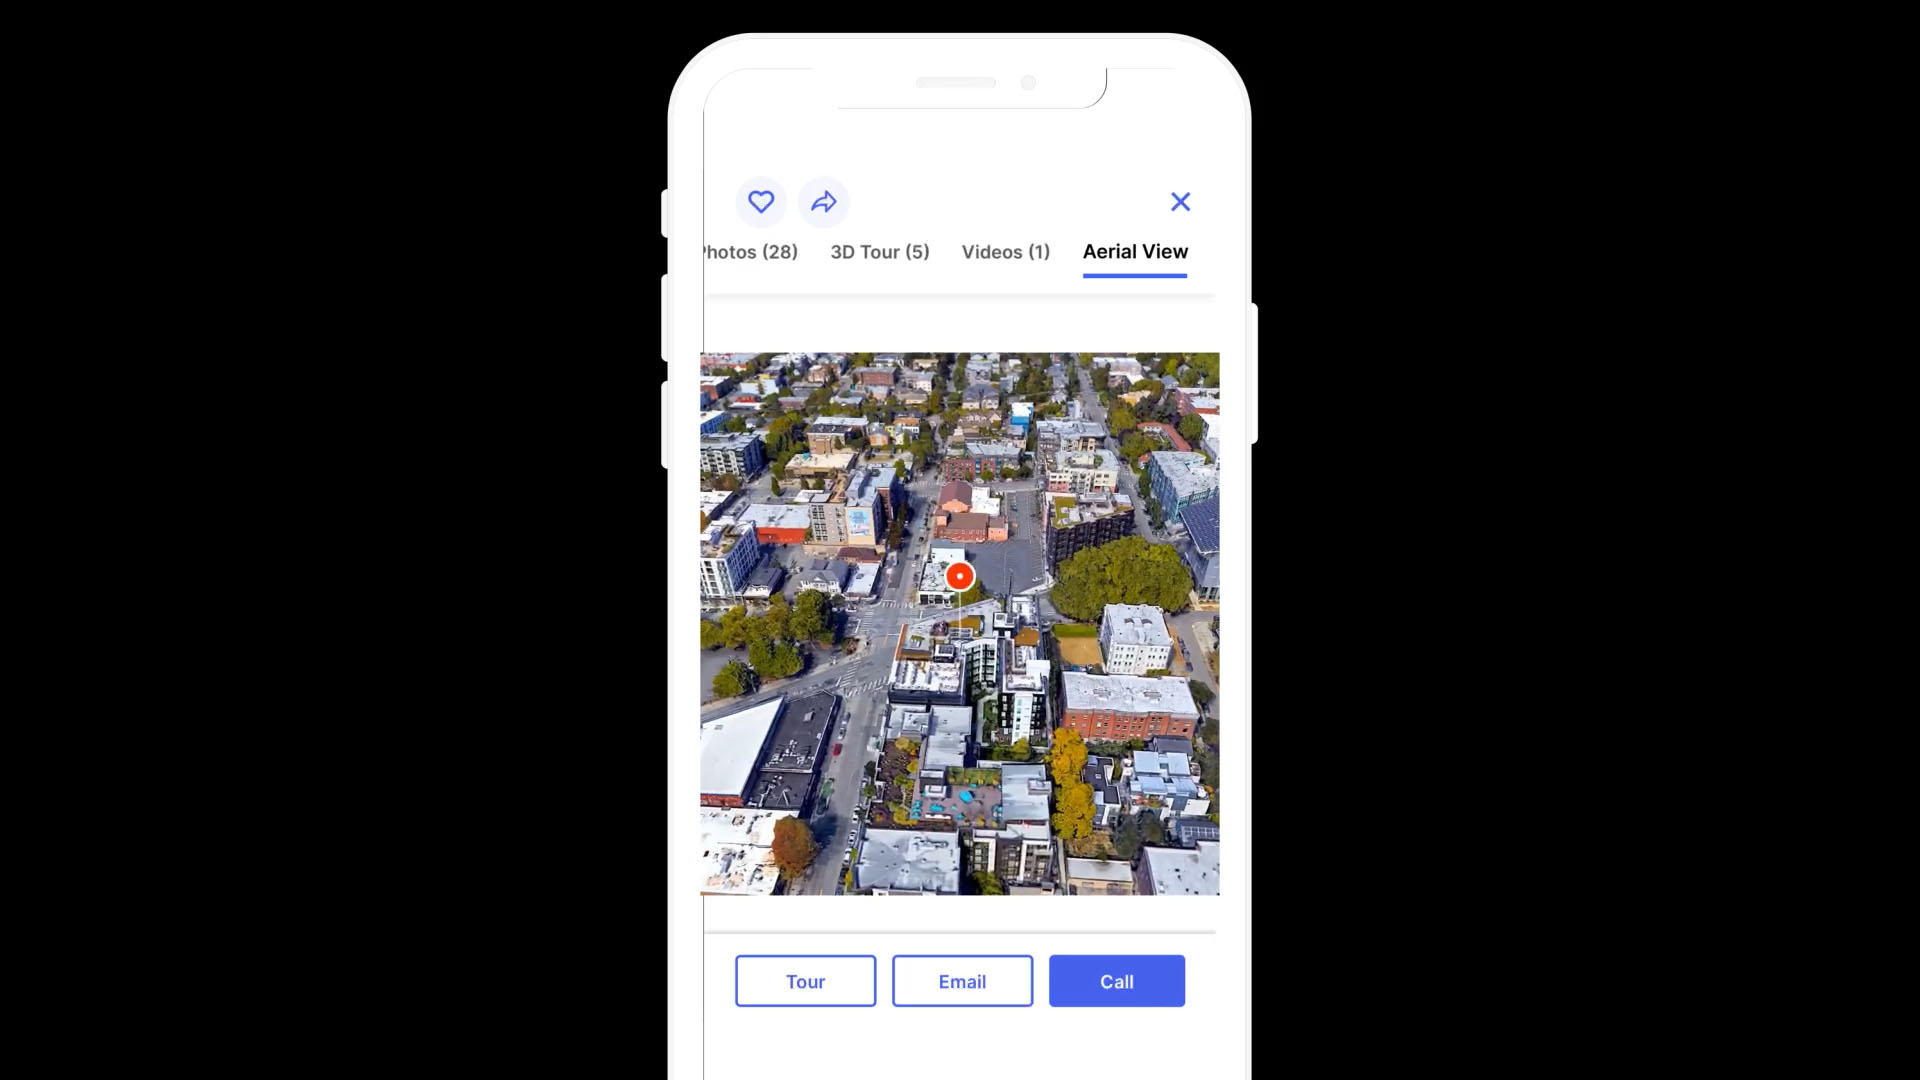 Aerial View from Google Maps Platform provides cinematic views from above of landmarks, monuments and other points of interest, including apartment community buildings. This functionality is optimized for both mobile and desktop use.